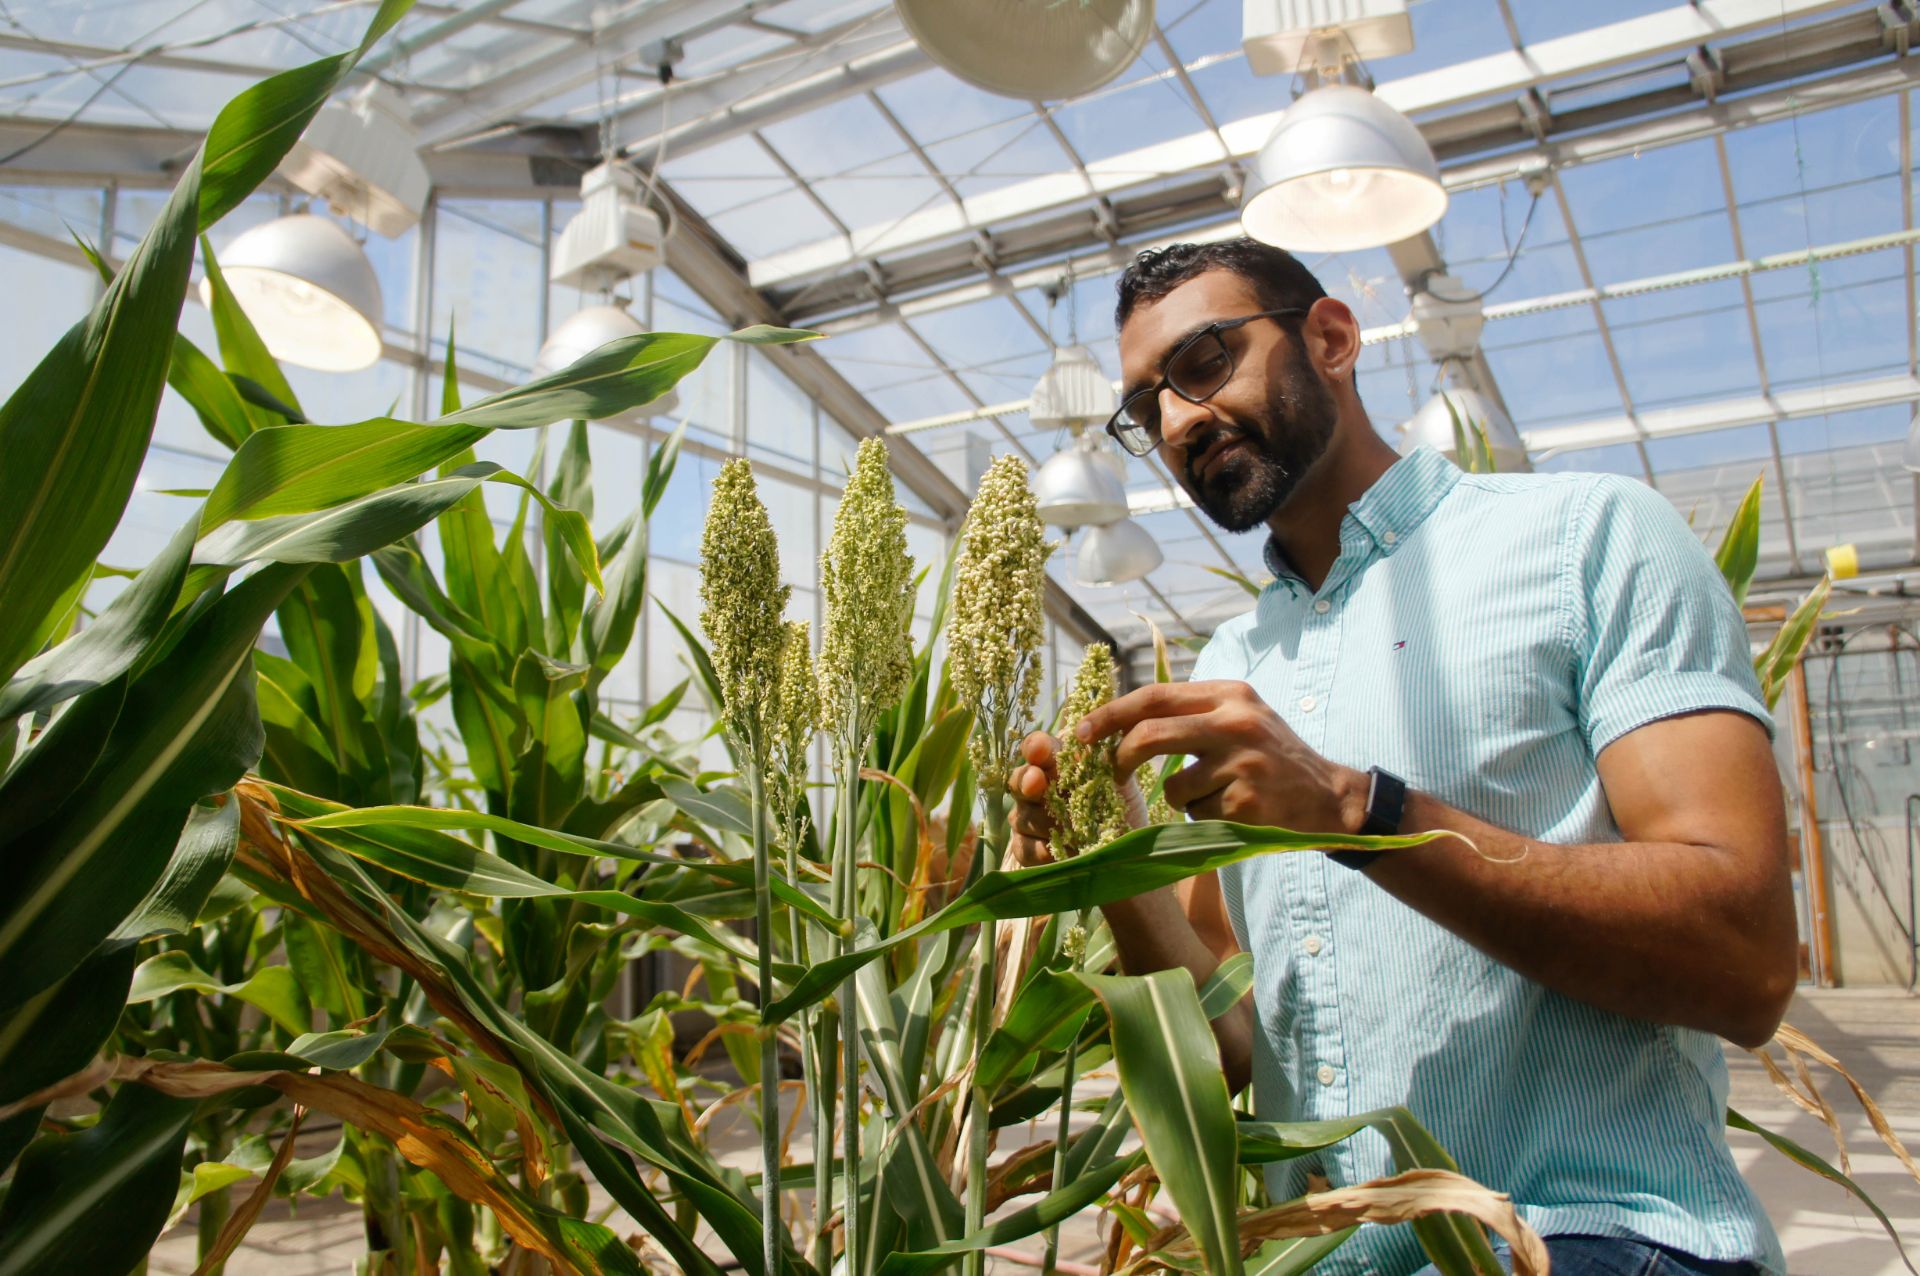 Dhruv Patel in a greenhouse. There are four lights behind him, and he is touching a plant in the foreground.